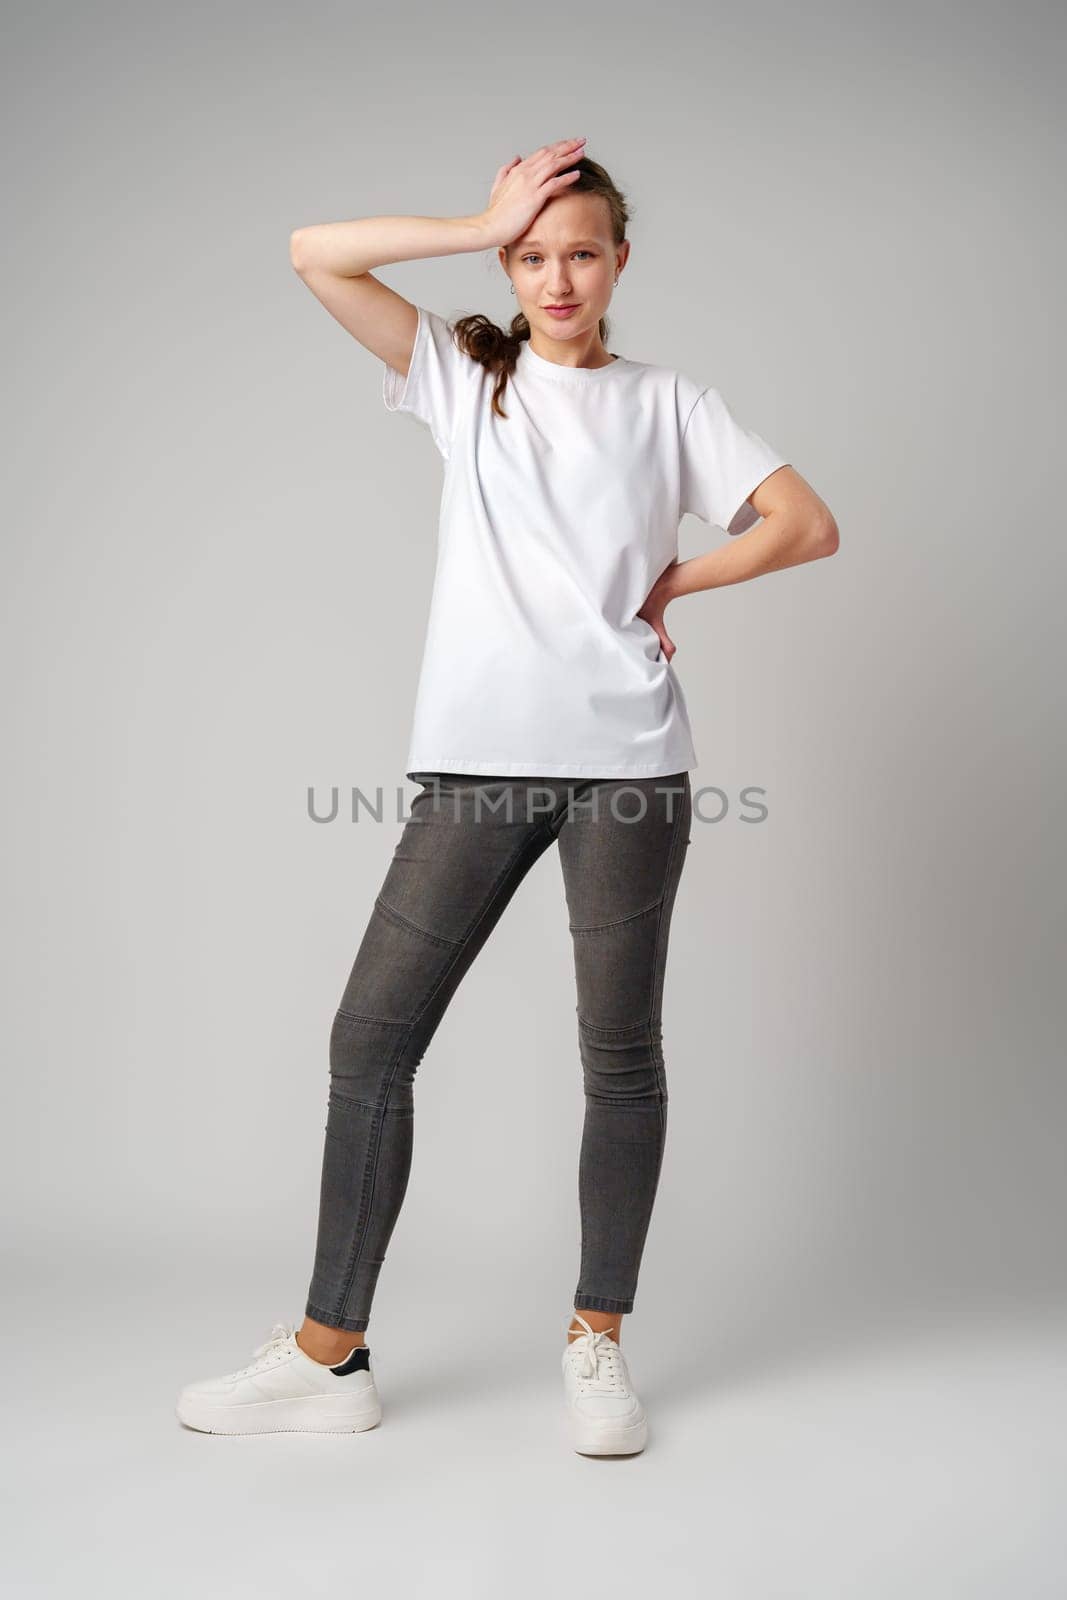 Beautiful young girl posing in white T-shirt and jeans on gray background by Fabrikasimf